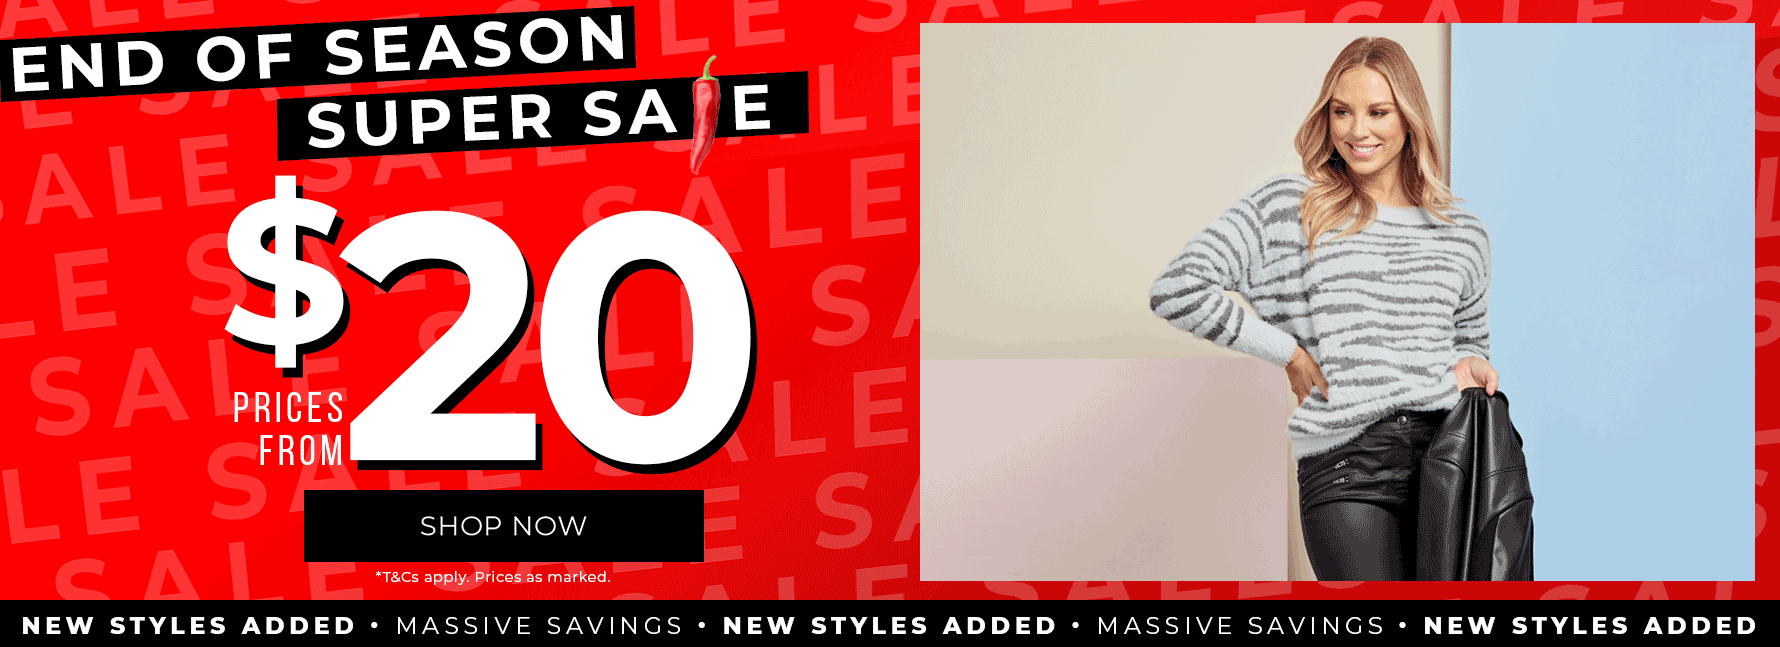 End of Season Super Sale - Shop styles from $20